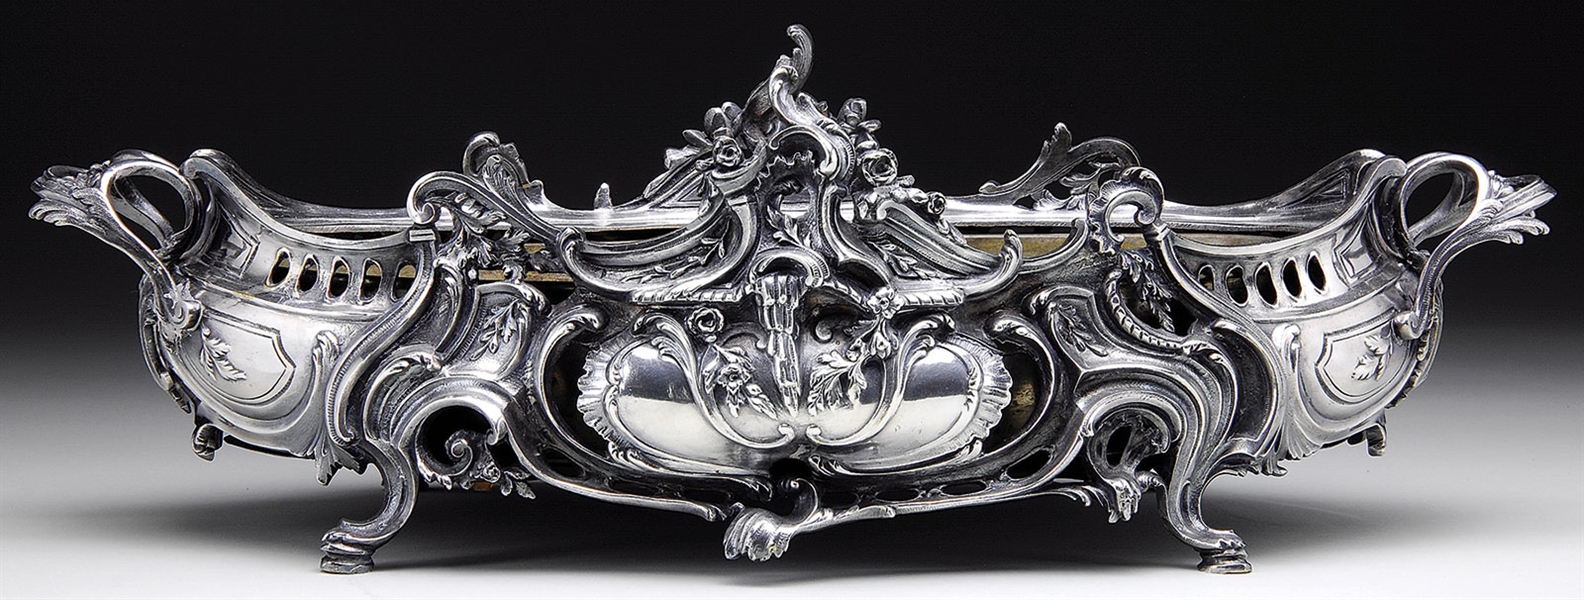 SILVER-PLATED CENTERPIECE BOWL                                                                                                                                                                          